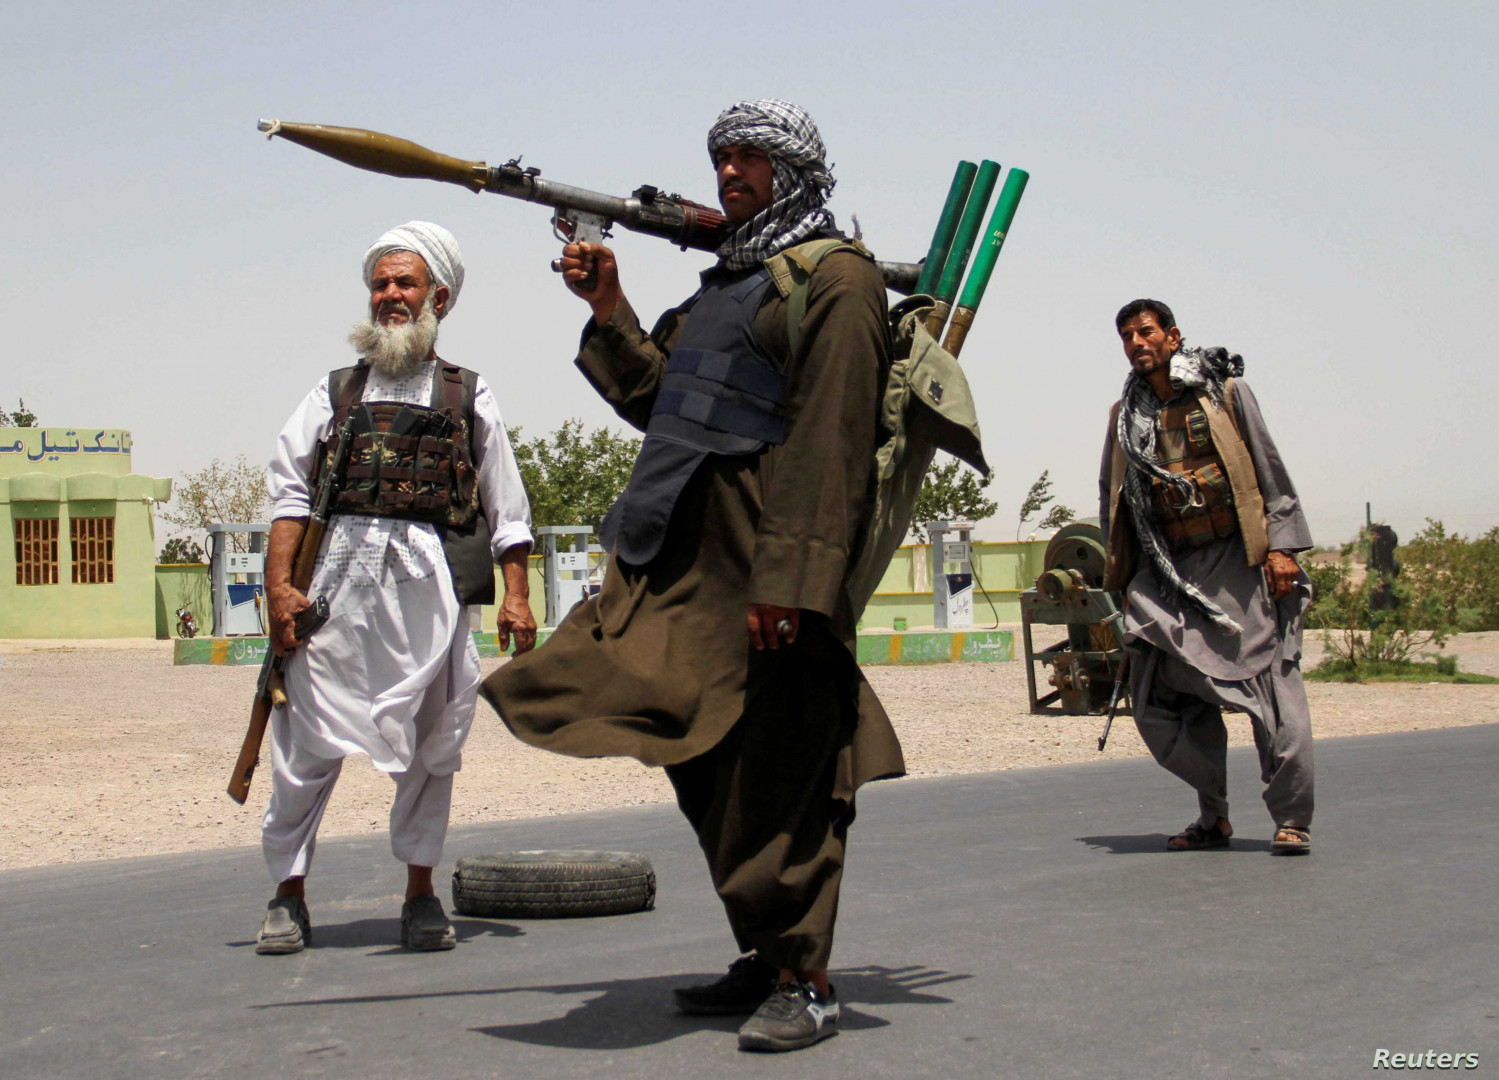 Taliban capture Afghanistan's Kandahar as embassies get staff out